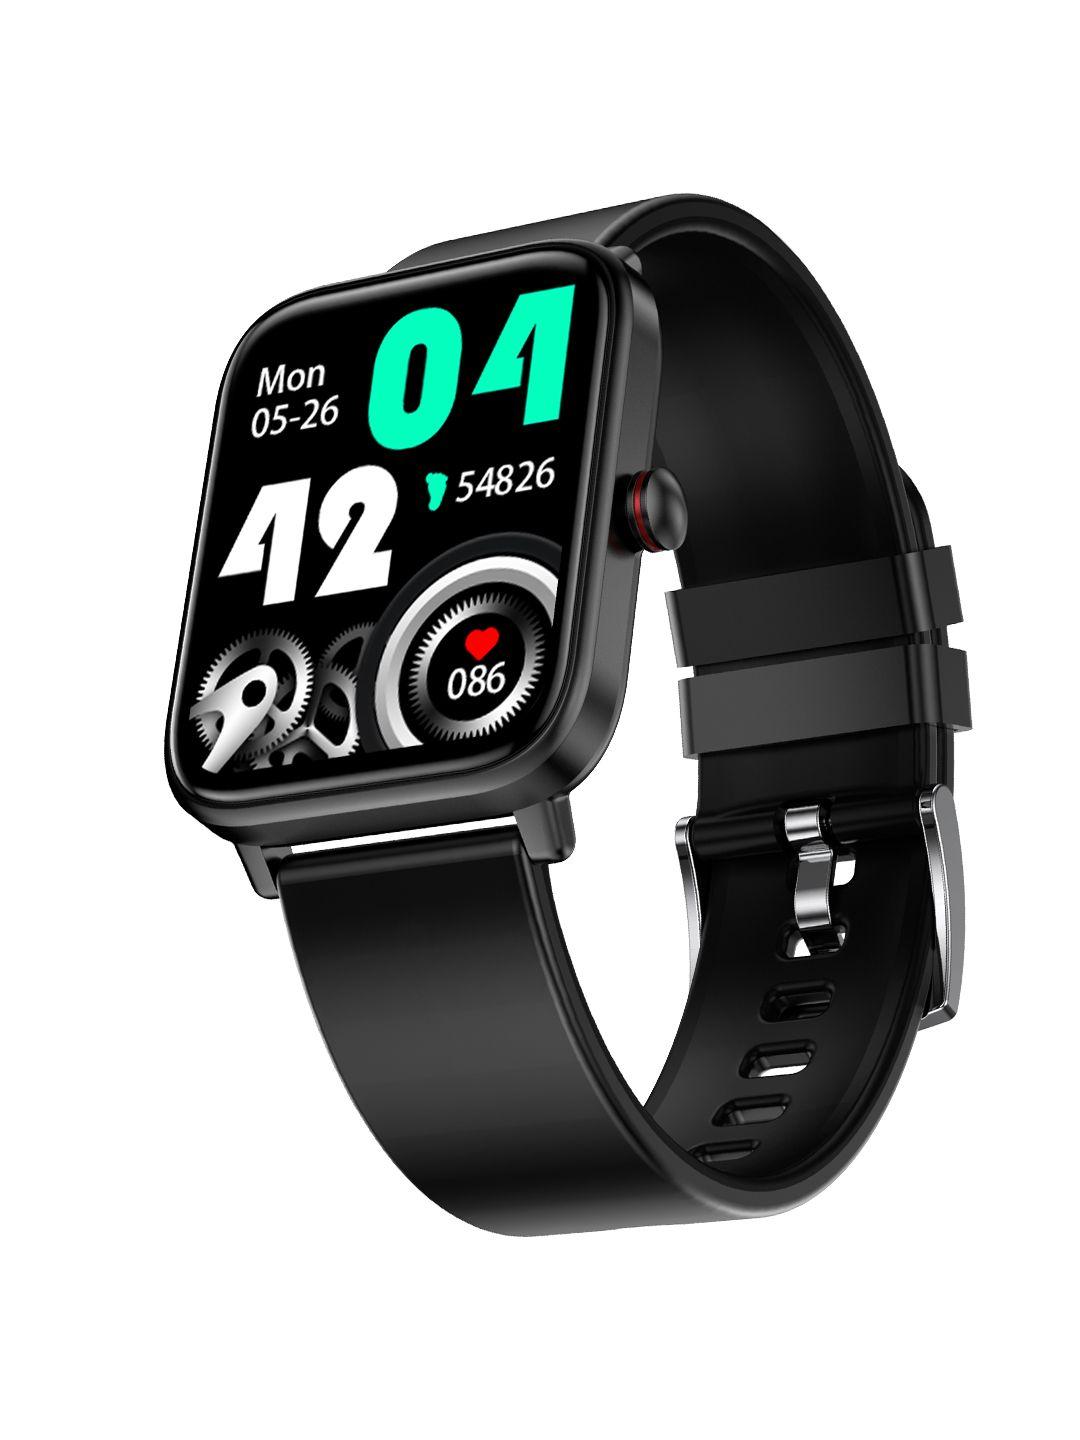 fire-boltt-ninja-pro-max-plus-1.83-inch-smartwatch-with-ip68-&-spo2-monitoring-26bswaay10